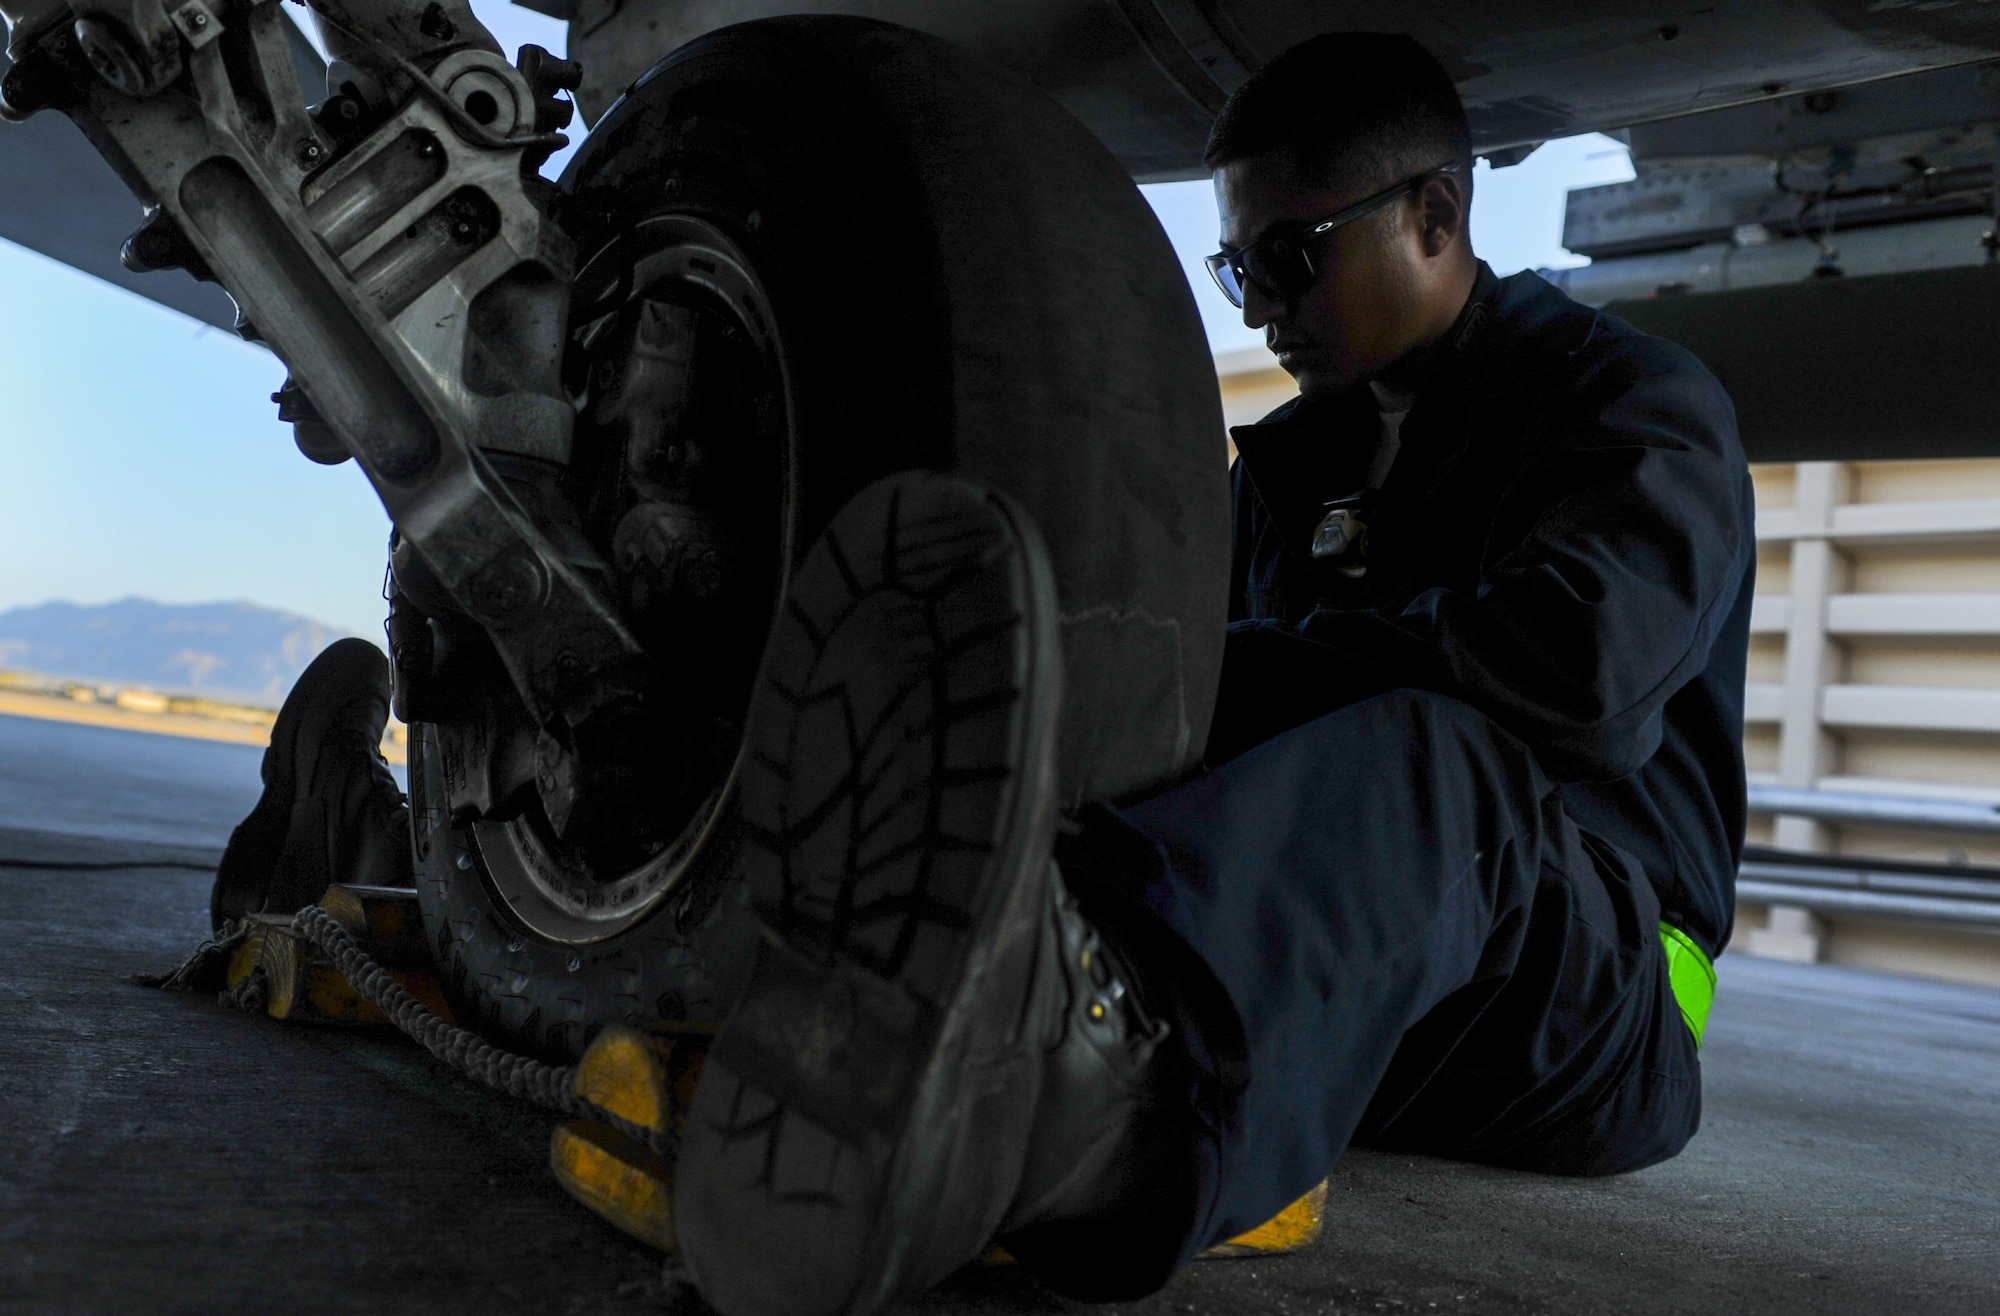 Senior Airman Manuel Jimenez, 555th Fighter Squadron crew chief, Aviano Air Base, Italy, prepares the cockpit of an F-16 Fighting Falcon for take-off at Nellis Air Force Base, Nev., Aug. 2, 2016. The 555th FS flew to Fort Irwin, Calif. to participate in Green Flag 16-8. (United States Air Force photo by Airman 1st Class Kevin Tanenbaum/Released)